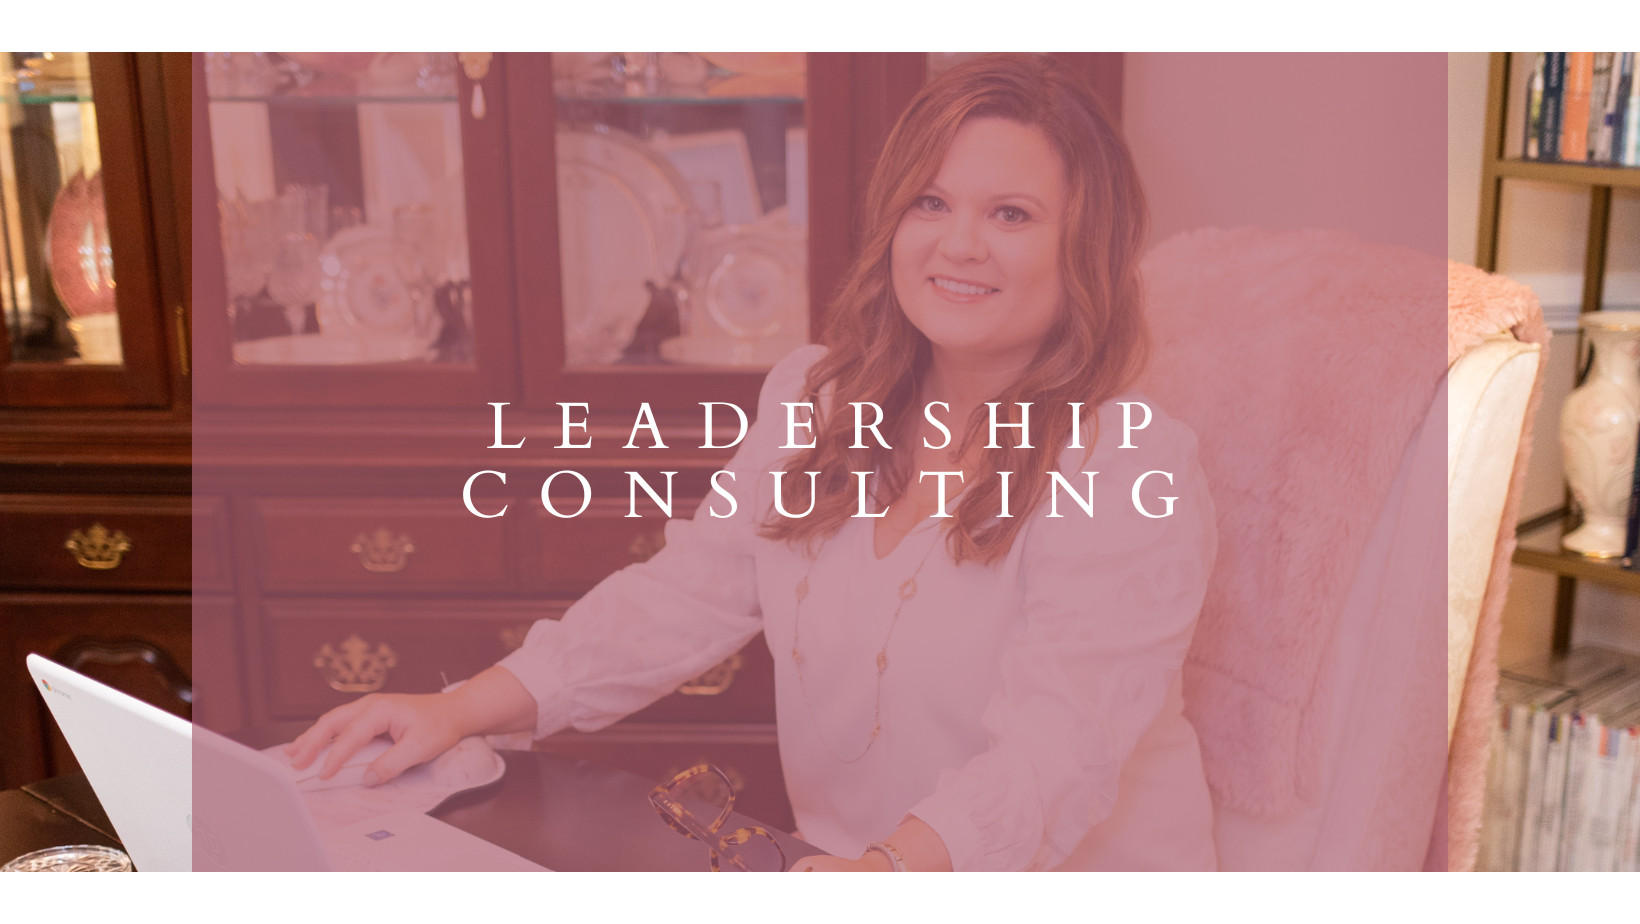 leadership consulting from a biblical perspective